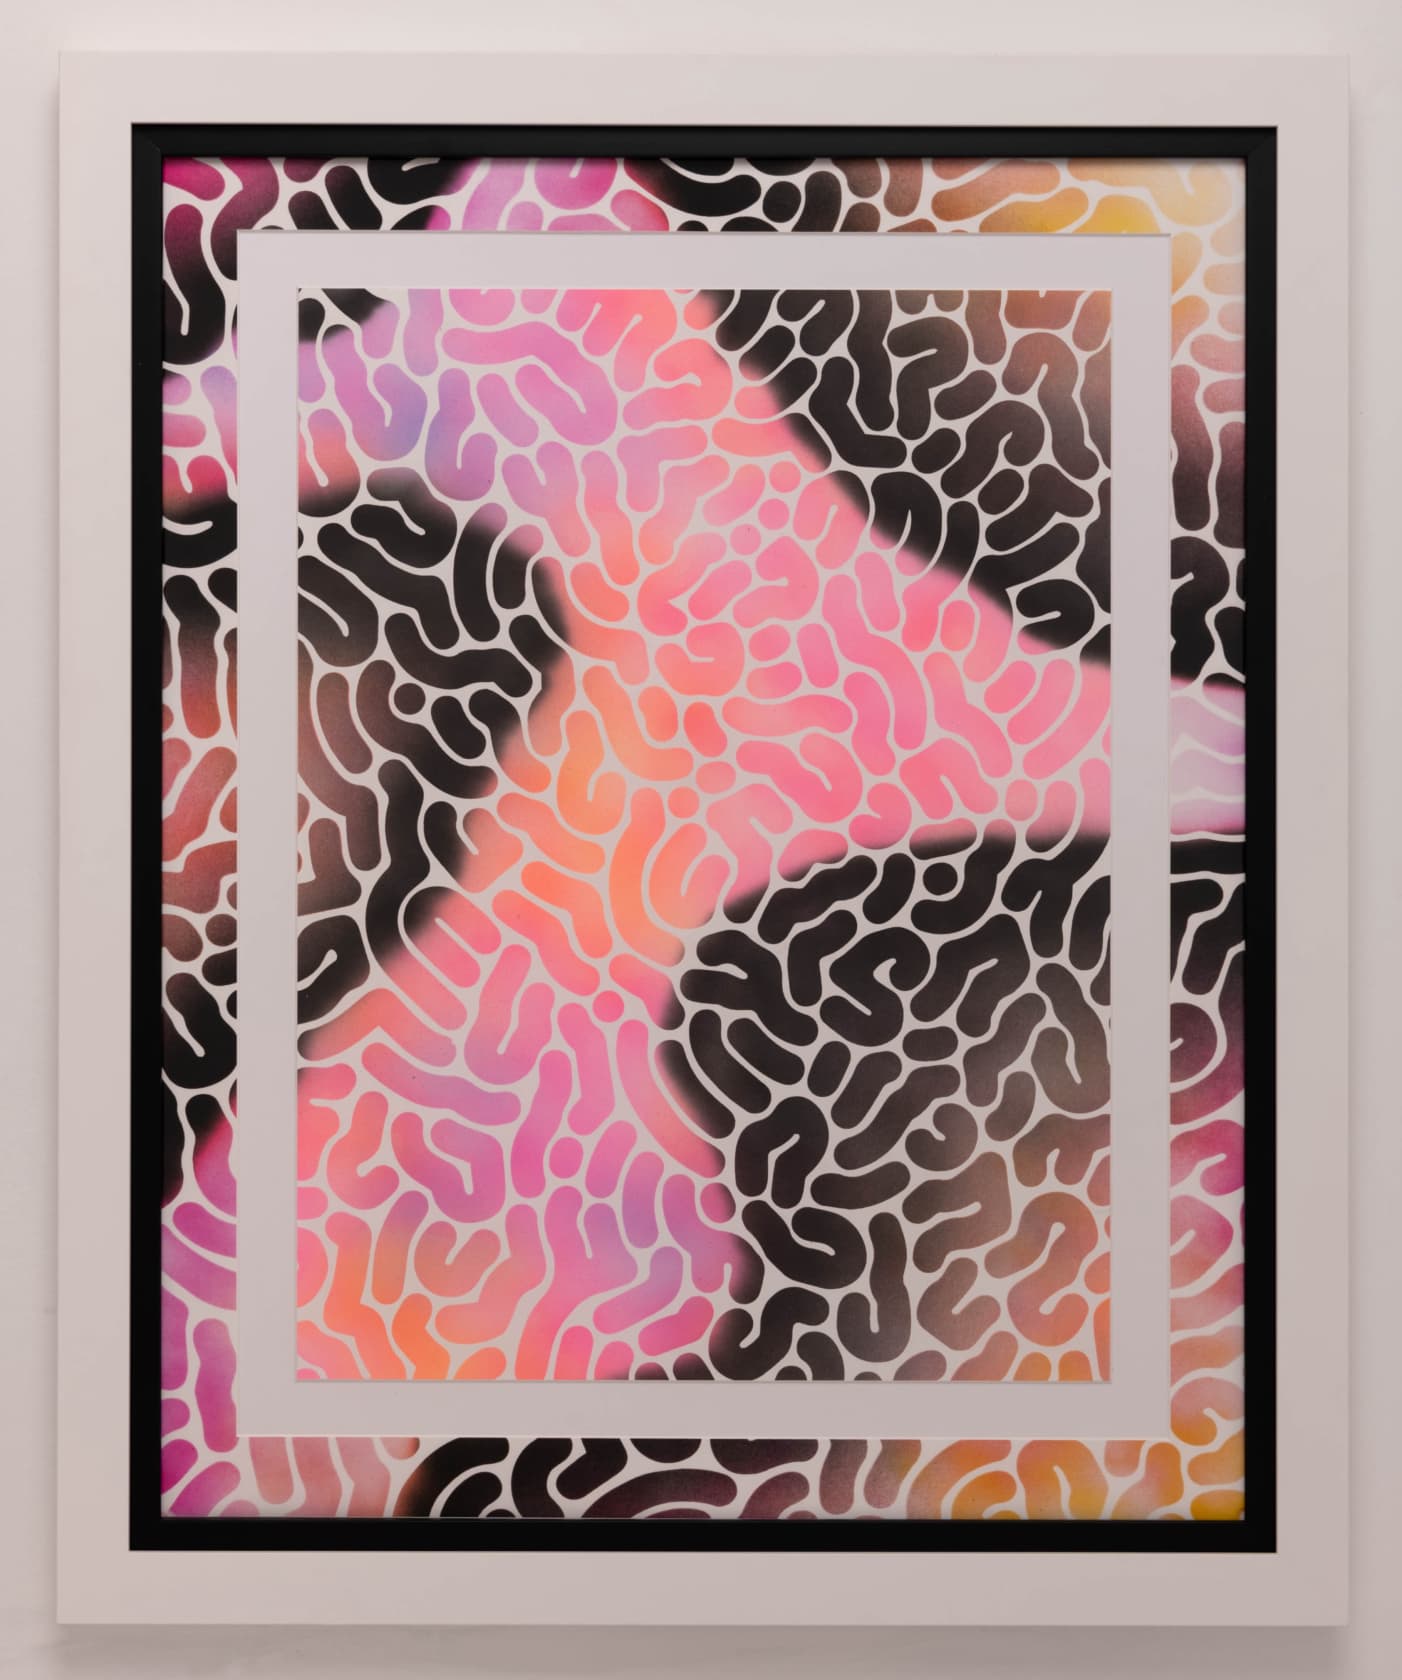 lefty out there Lux Dimensionis VIII Acrylic, 100lb cotton rag paper. Framed in poplar and museum plexiglass